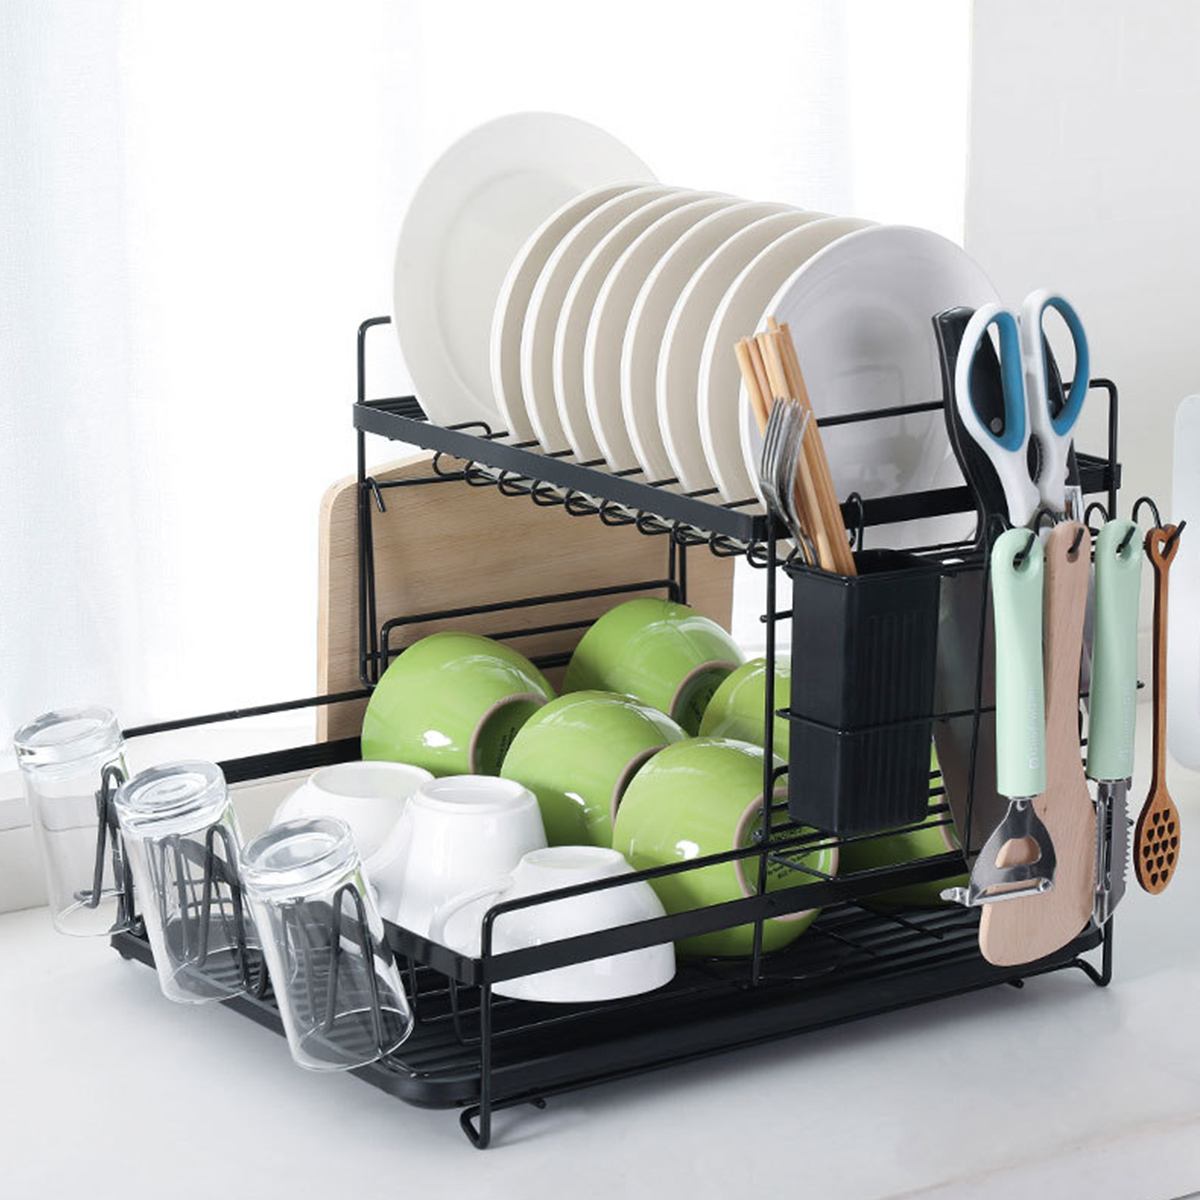 Other Tools 2 Tier Multifunctional Kitchen Drying Dish Rack over Sink Drainer Shelf was listed